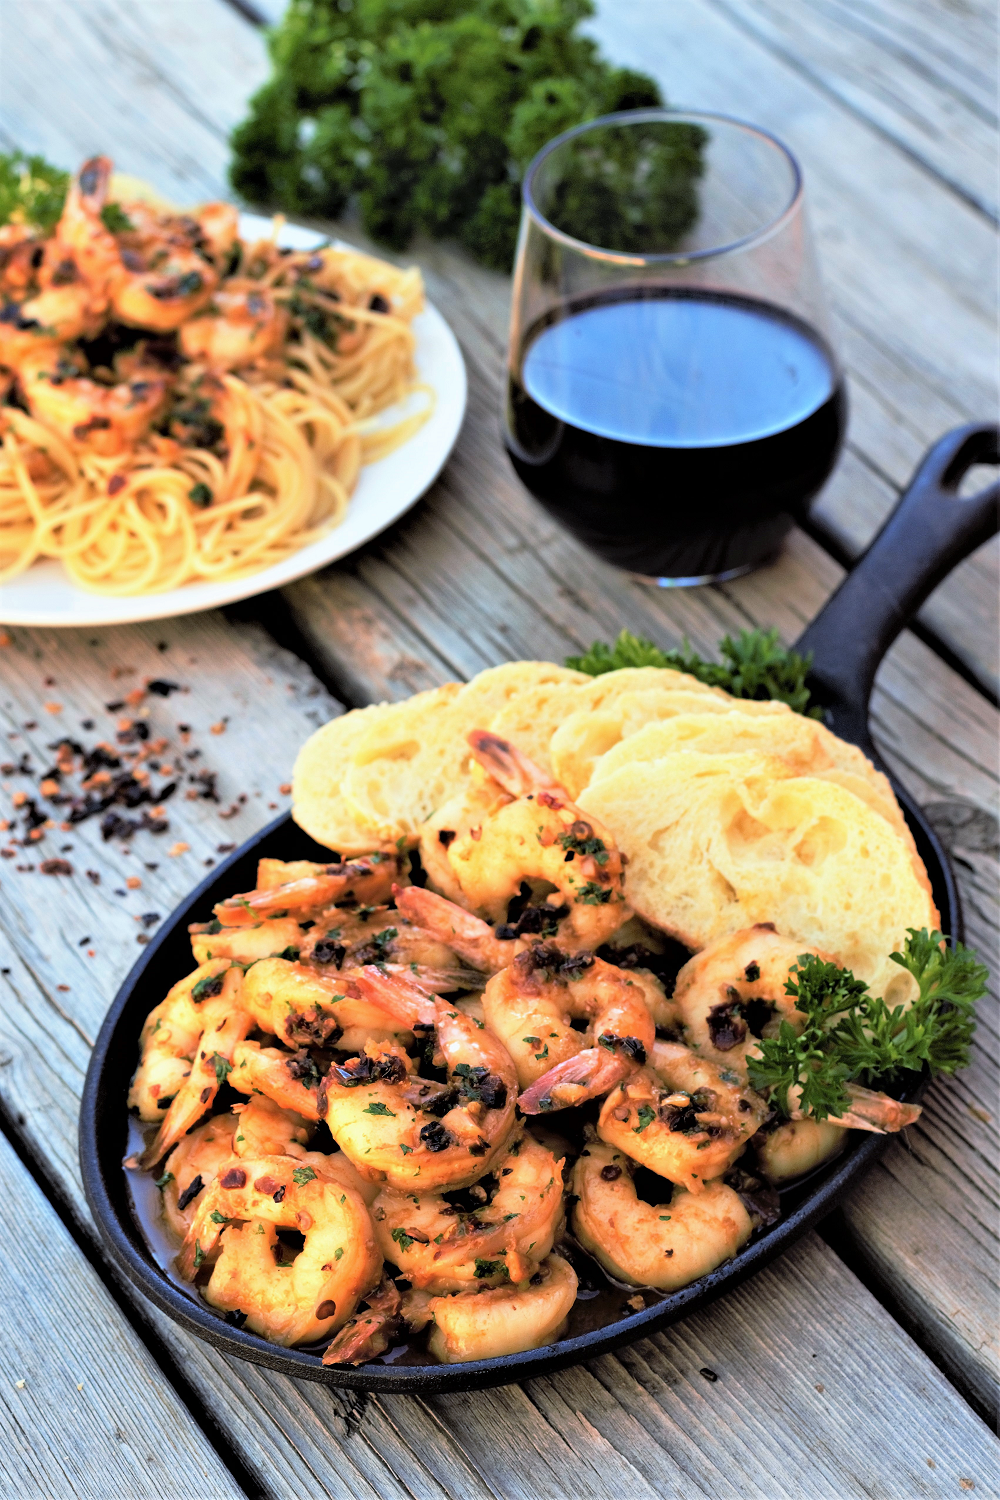 A blend of dried chipotle, ancho, & habanero peppers create an instantly deep smokiness to kick up this spoon-licking heavenly garlic shrimp scampi.